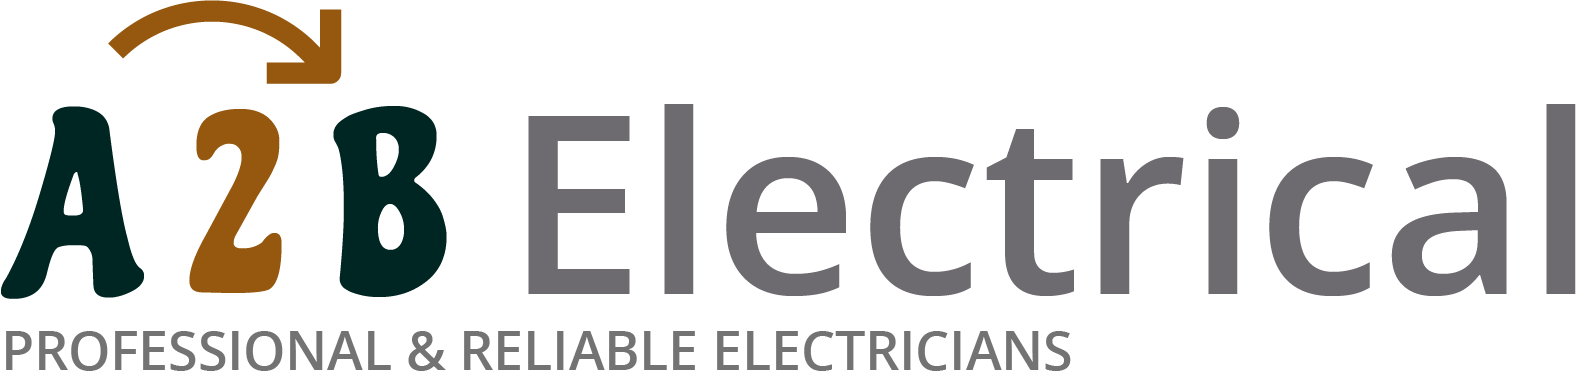 If you have electrical wiring problems in Hebden Bridge, we can provide an electrician to have a look for you. 